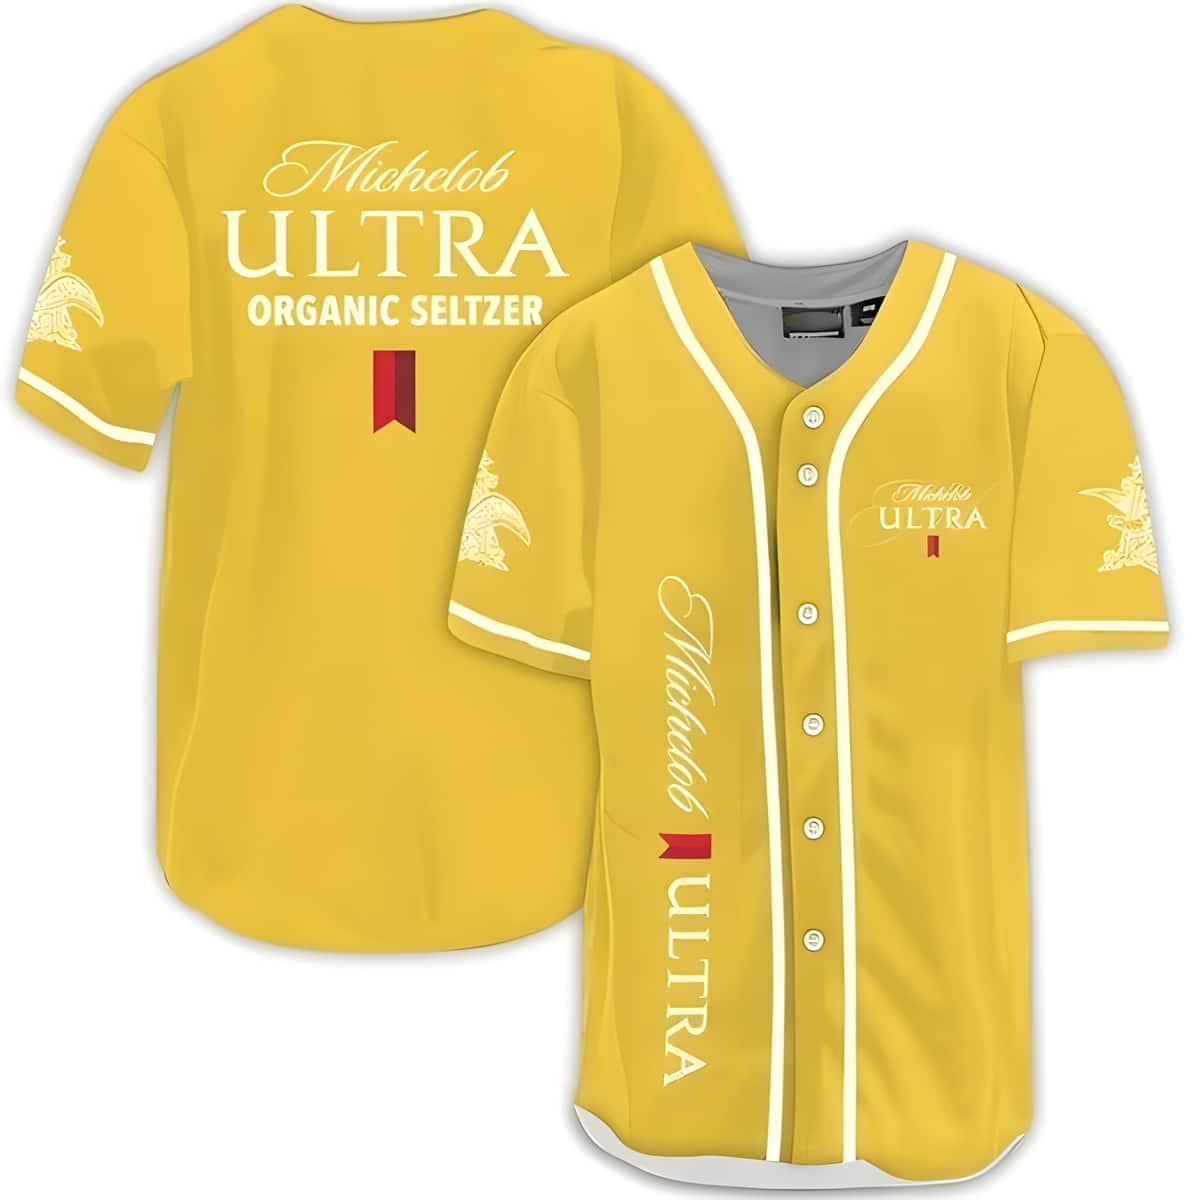 Classic Yellow Michelob ULTRA Baseball Jersey Organic Seltzer Gift For Dad